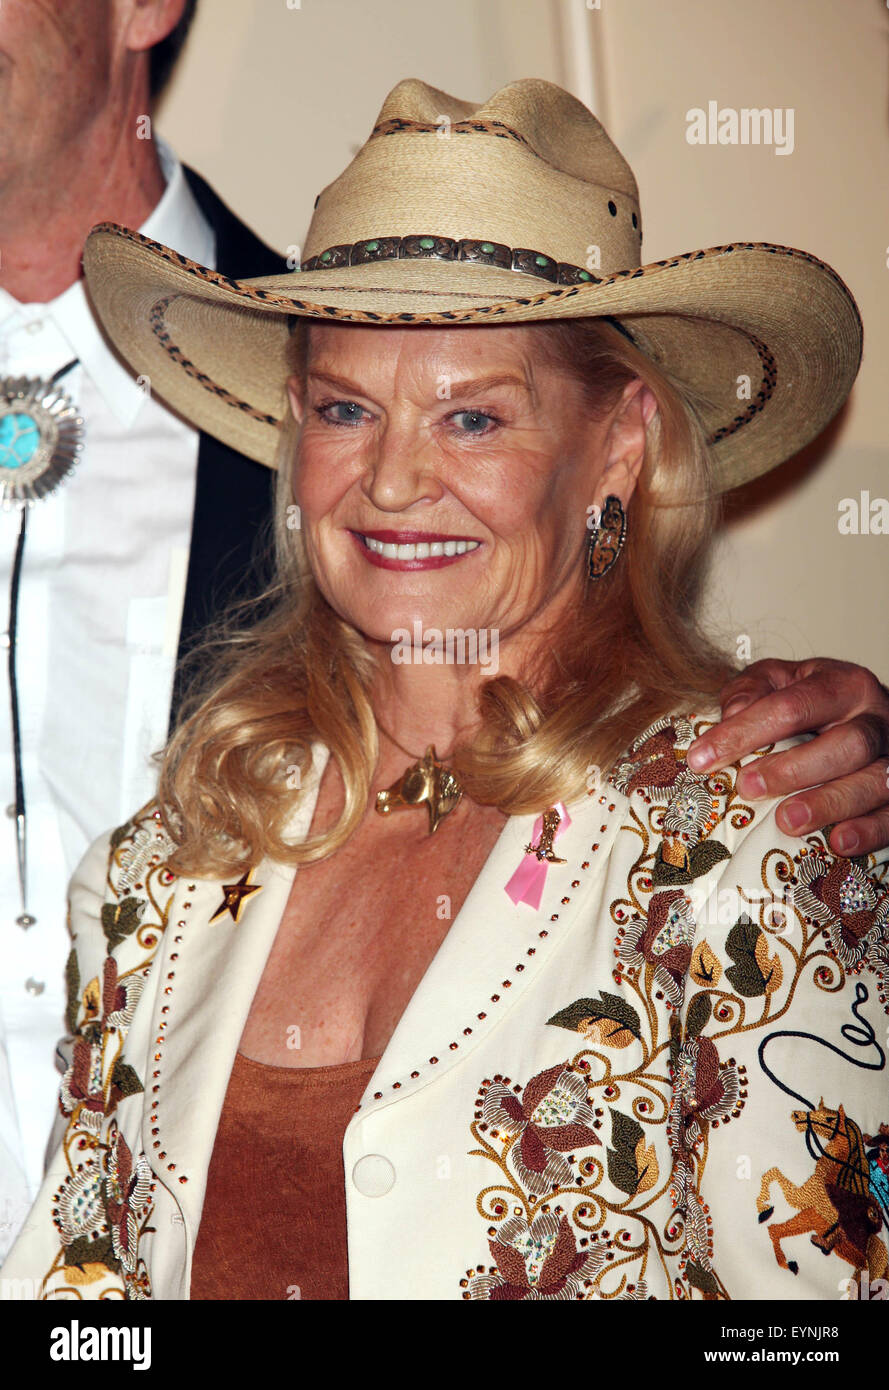 File. 1st Aug, 2015. US country singer LYNN ANDERSON (September 26, 1947 - July 31, 2015) best known for her worldwide 1971 hit (I Never Promised You a) Rose Garden, has died, aged 67. She had been in hospital in Nashville, where she suffered a heart attack on Thursday. Other US hits included You're My Man, How Can I Unlove You? and Top of the World. Pictured: Aug 11, 2007 - Beverly Hills, California - Lynn Anderson arrives at the 25th Annual Golden Boot Awards. (Credit Image: © Krista Kennell/ZUMA Press) Stock Photo